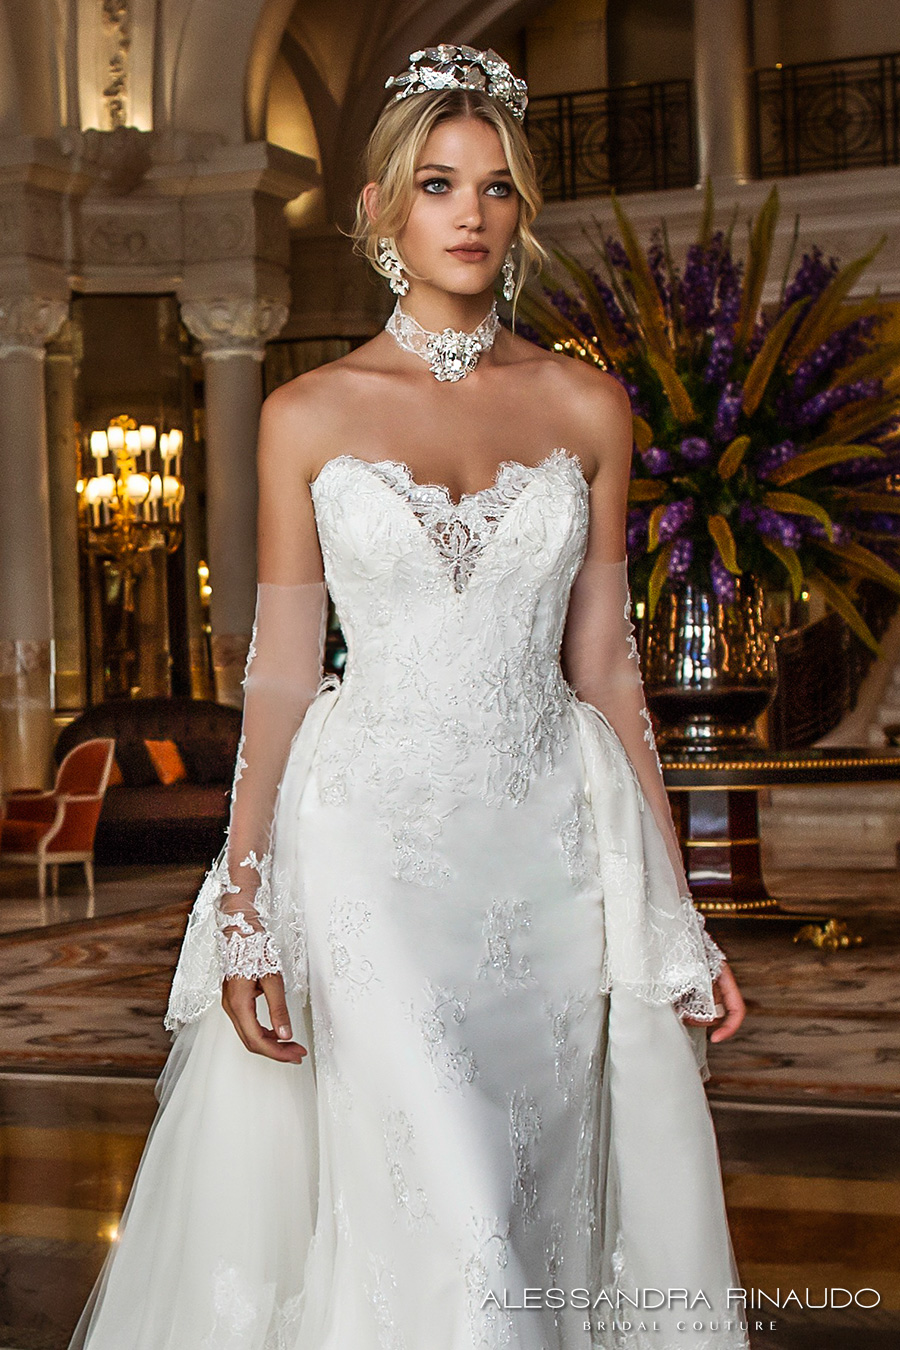 Wedding Dresses With Gloves Top 10 - Find the Perfect Venue for Your ...